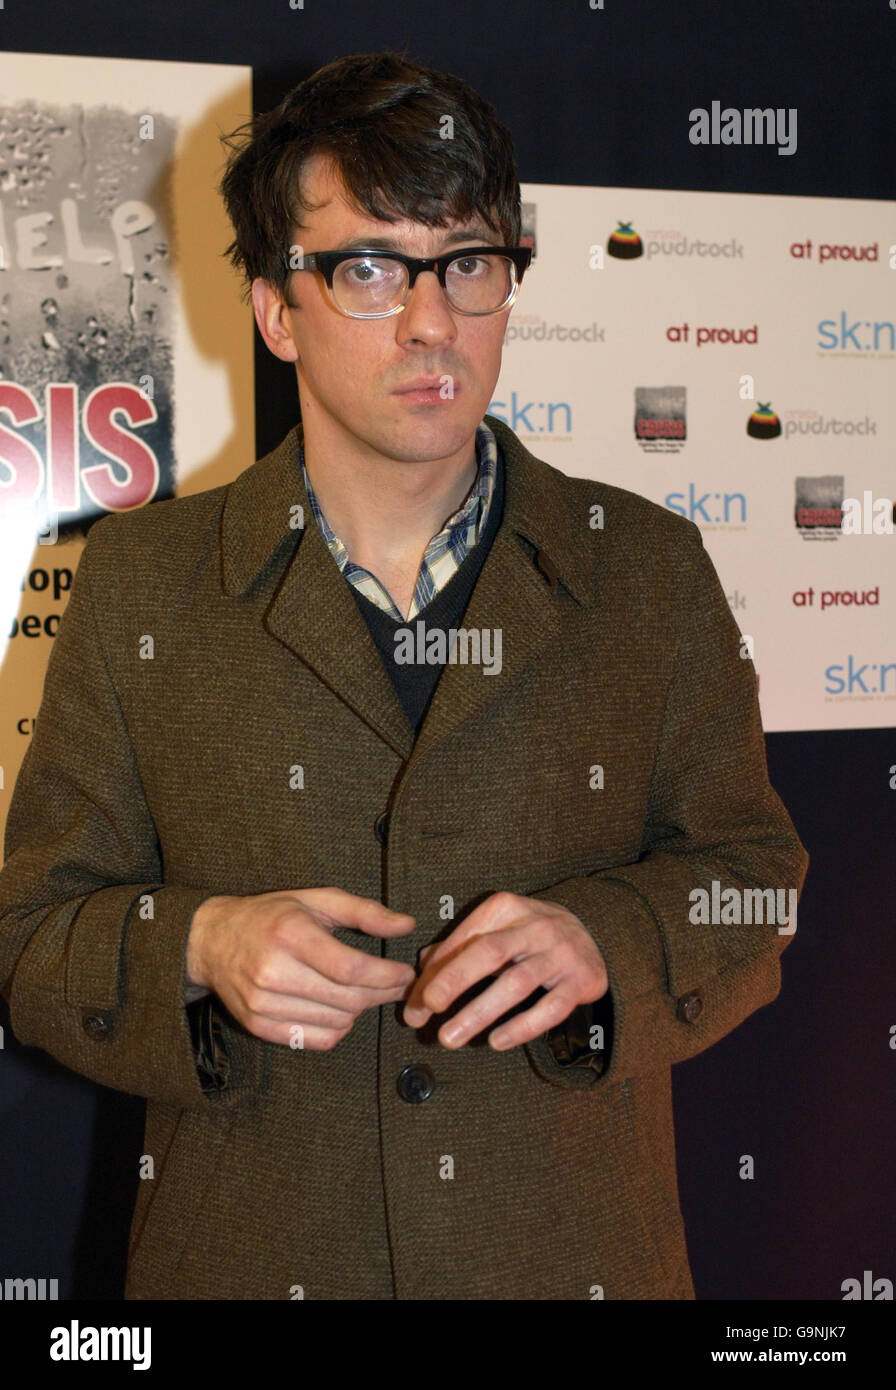 Graham Coxon attends 'Pudstock', a benefit gig for the homelessness charity Crisis, at the Proud Galleries in Camden, north London. Stock Photo